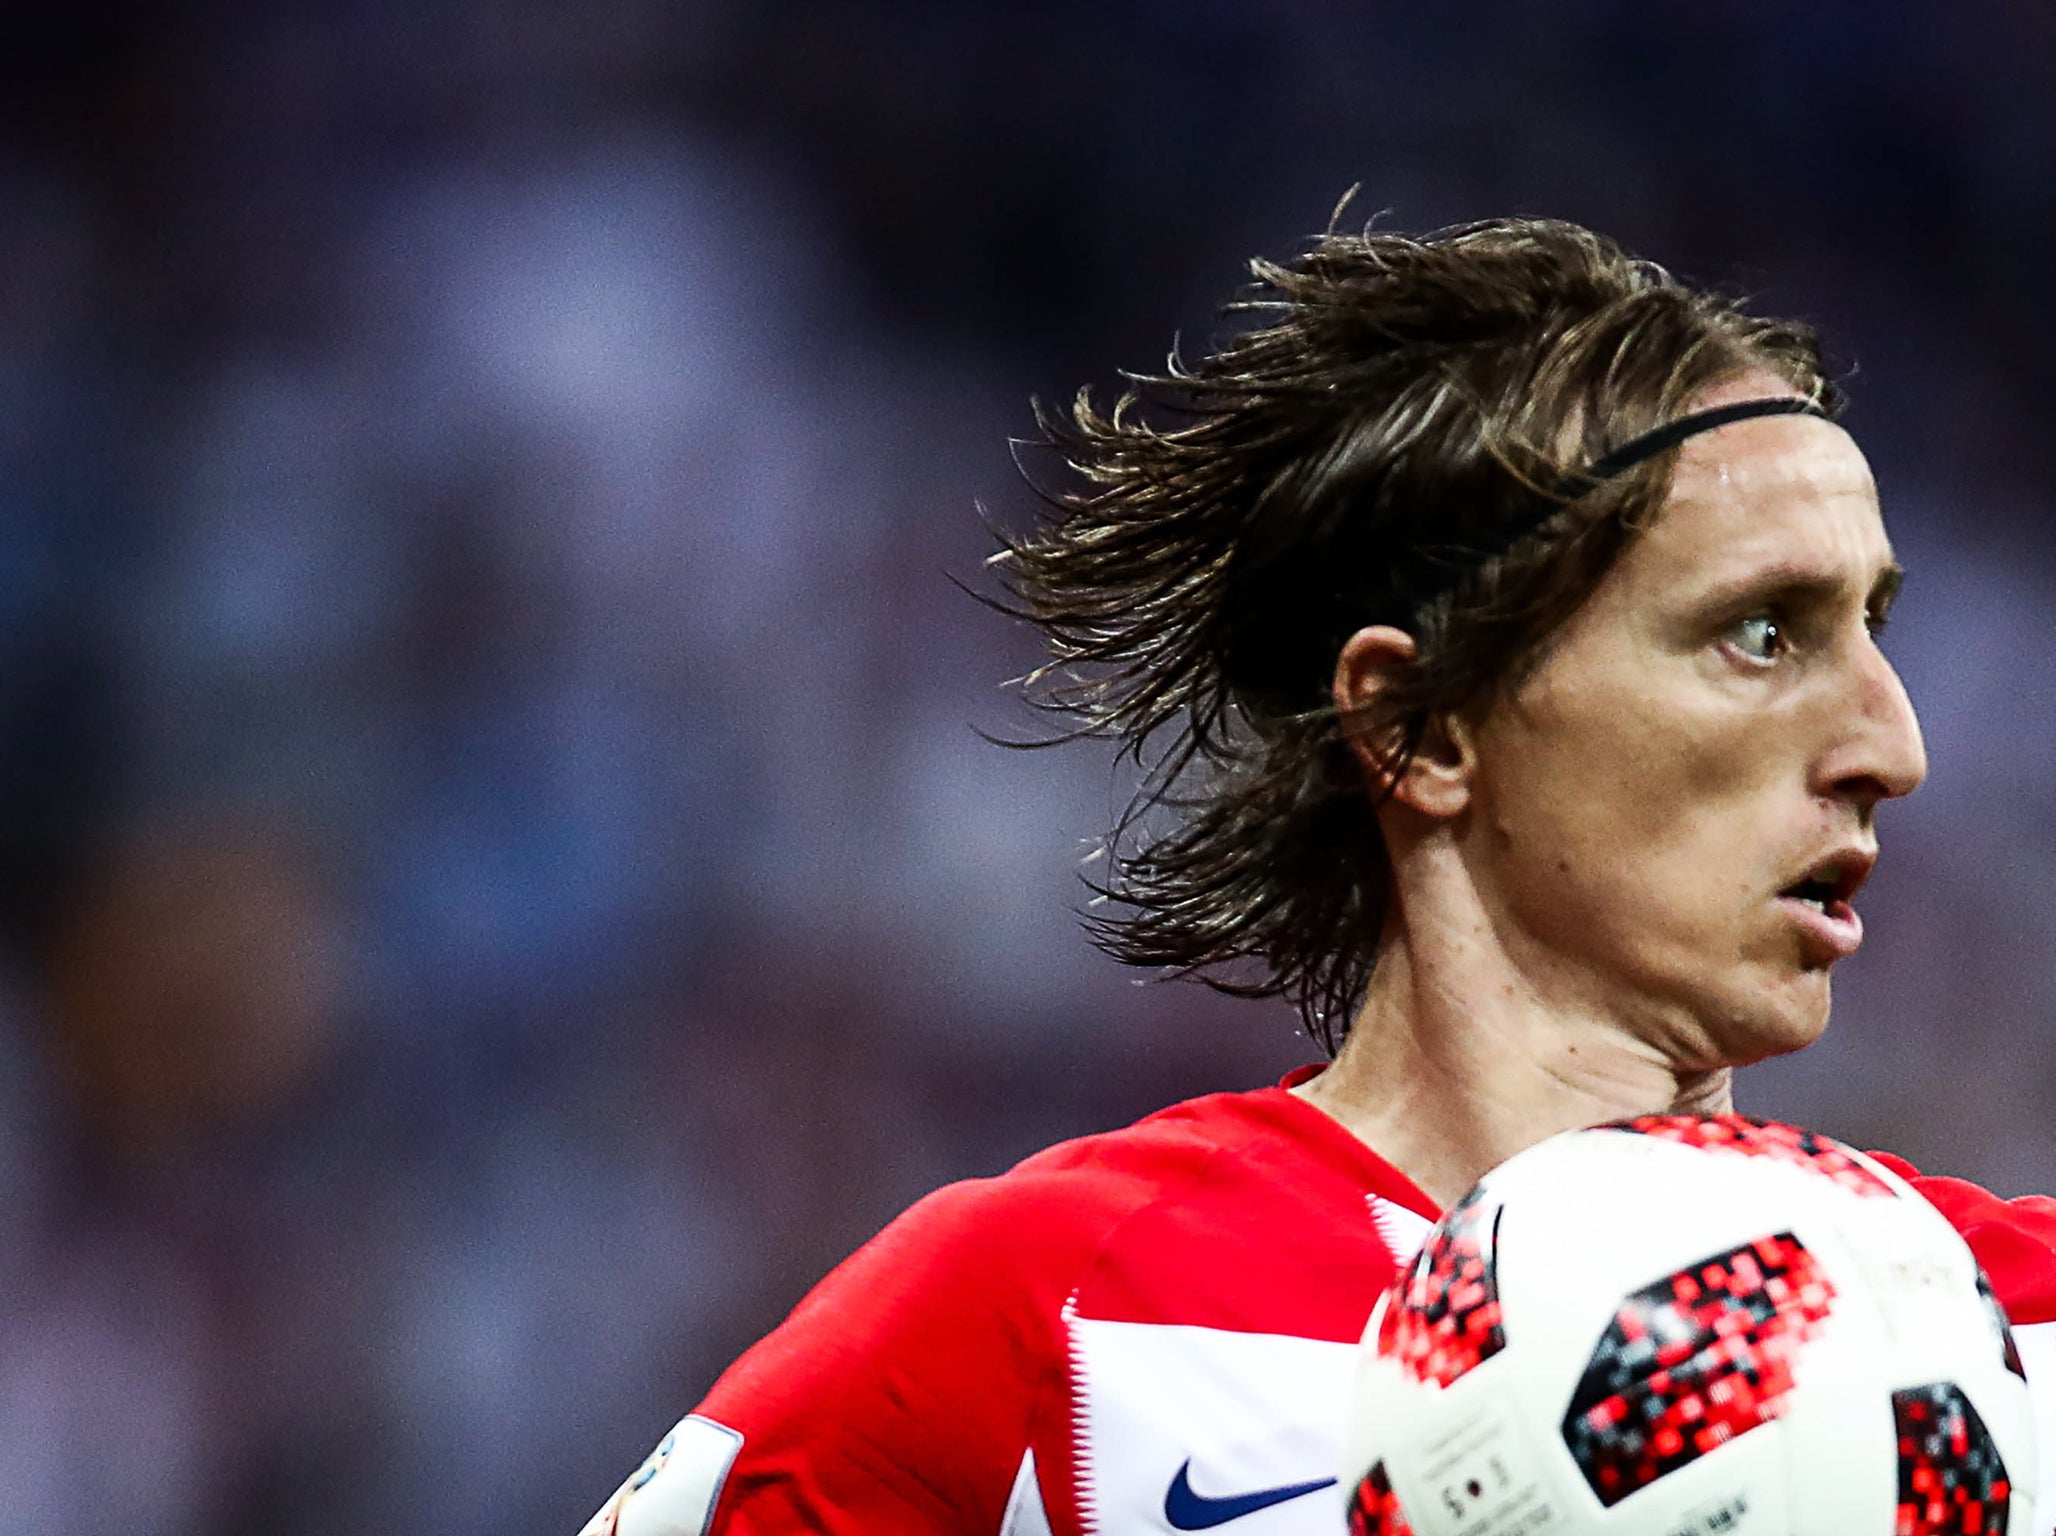 Modric was unable to help his side win